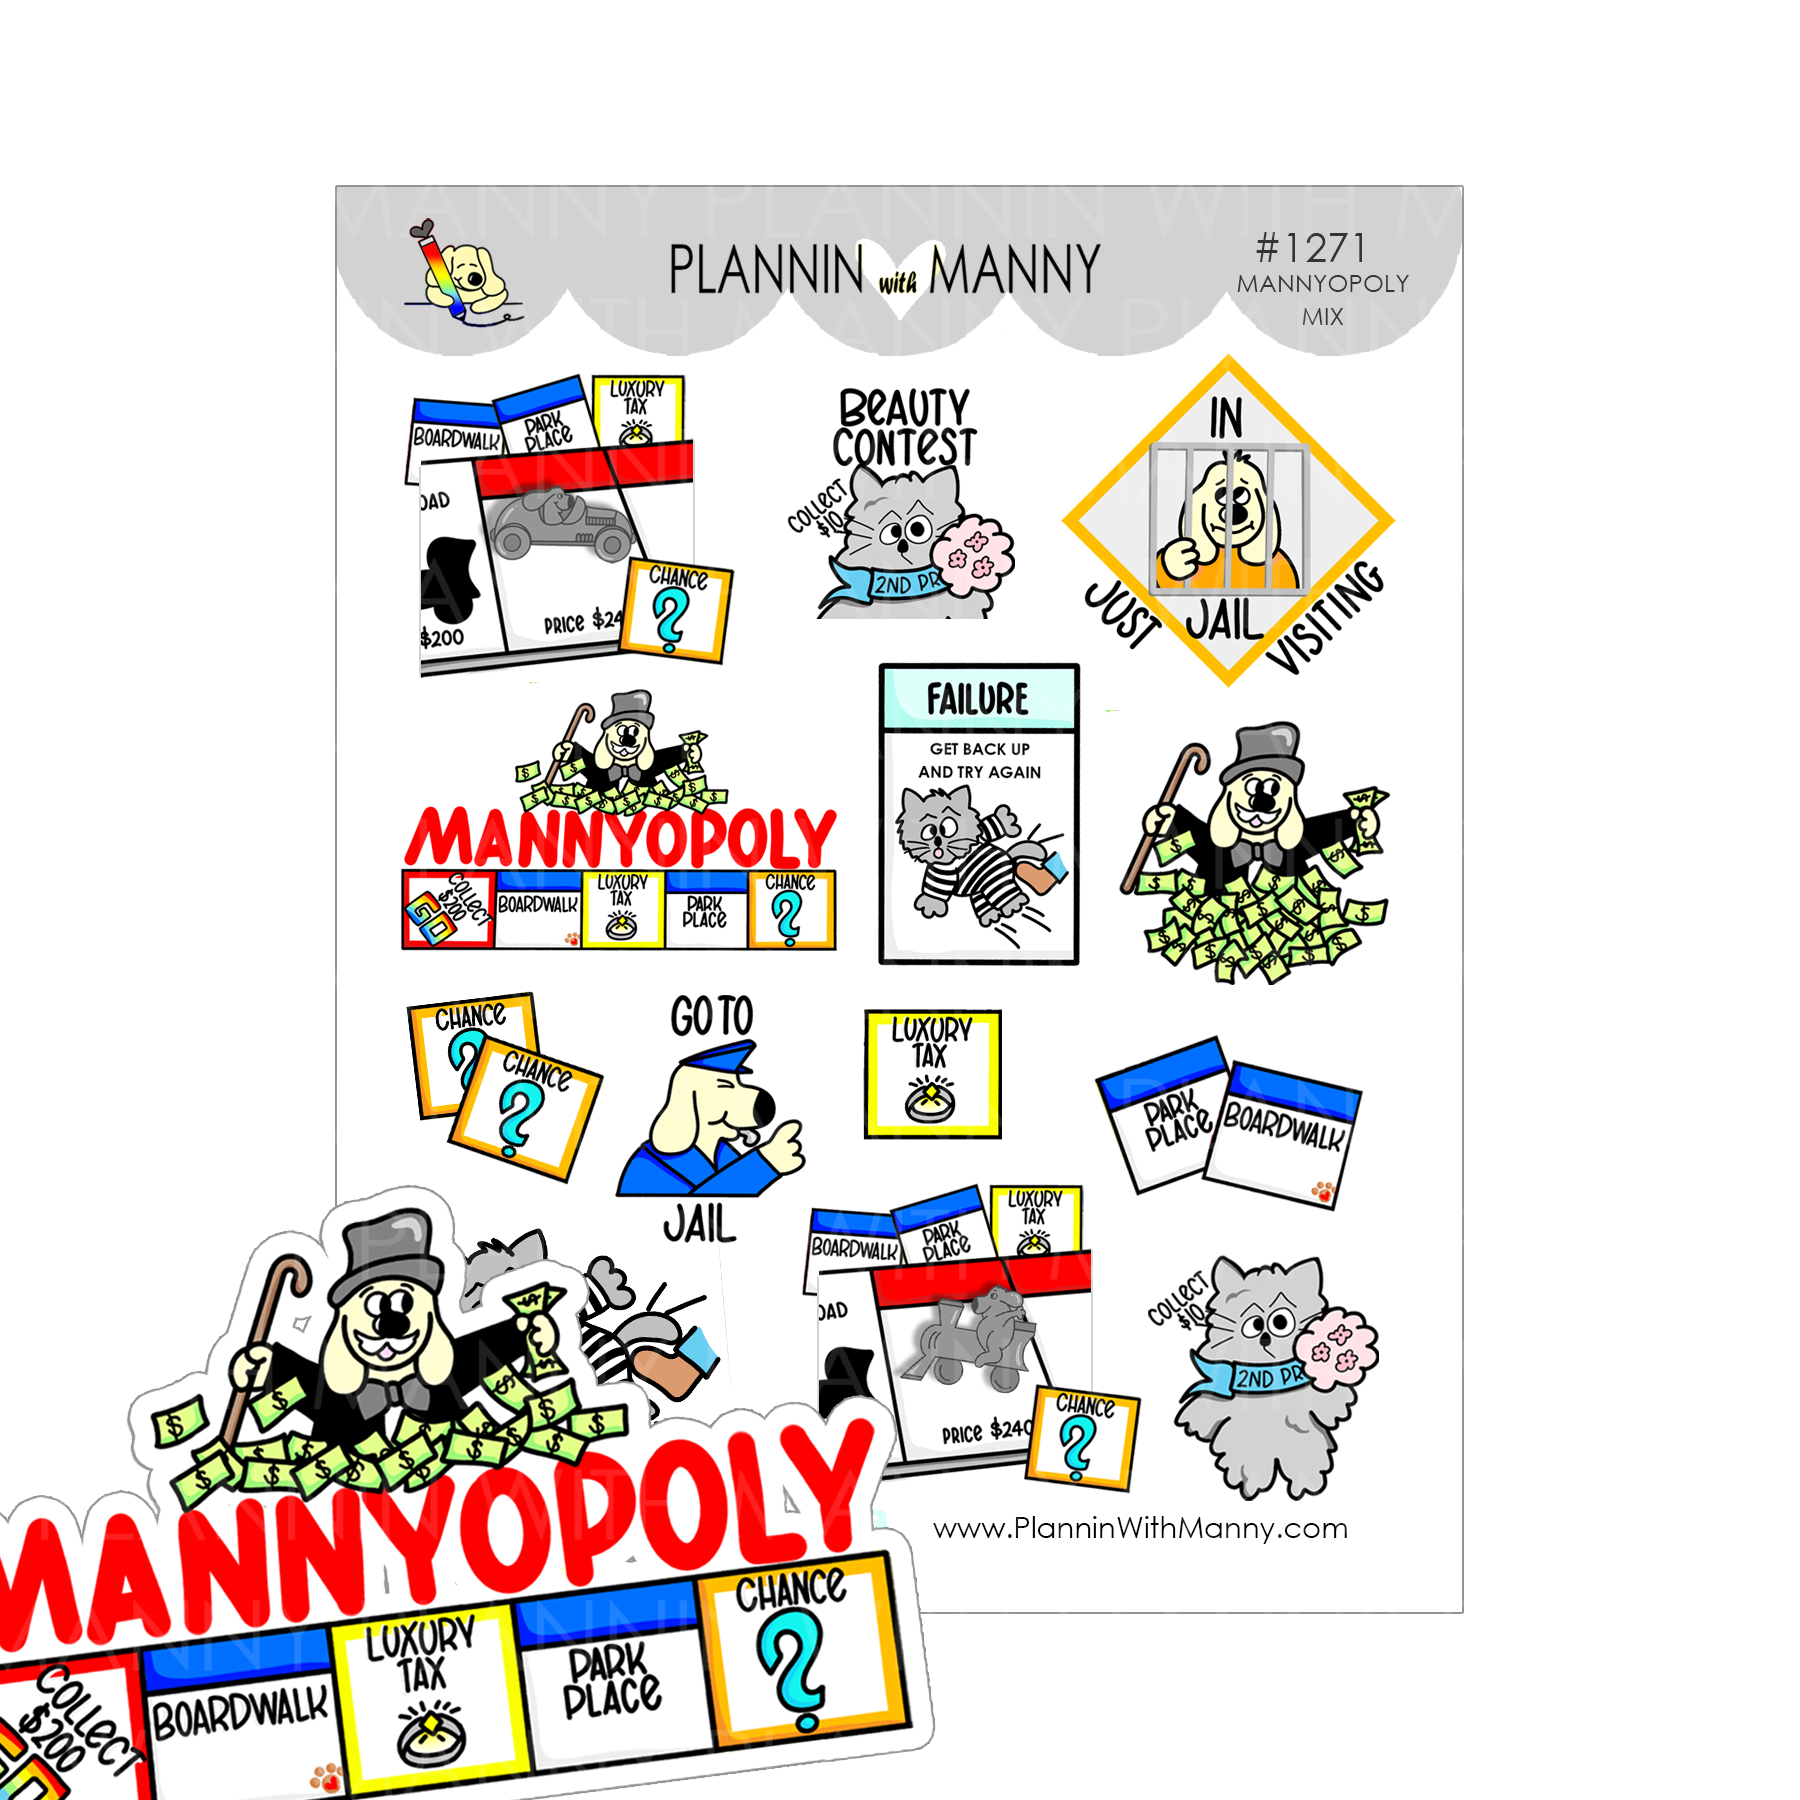 1271 Mannyopoly Mix Planner Stickers